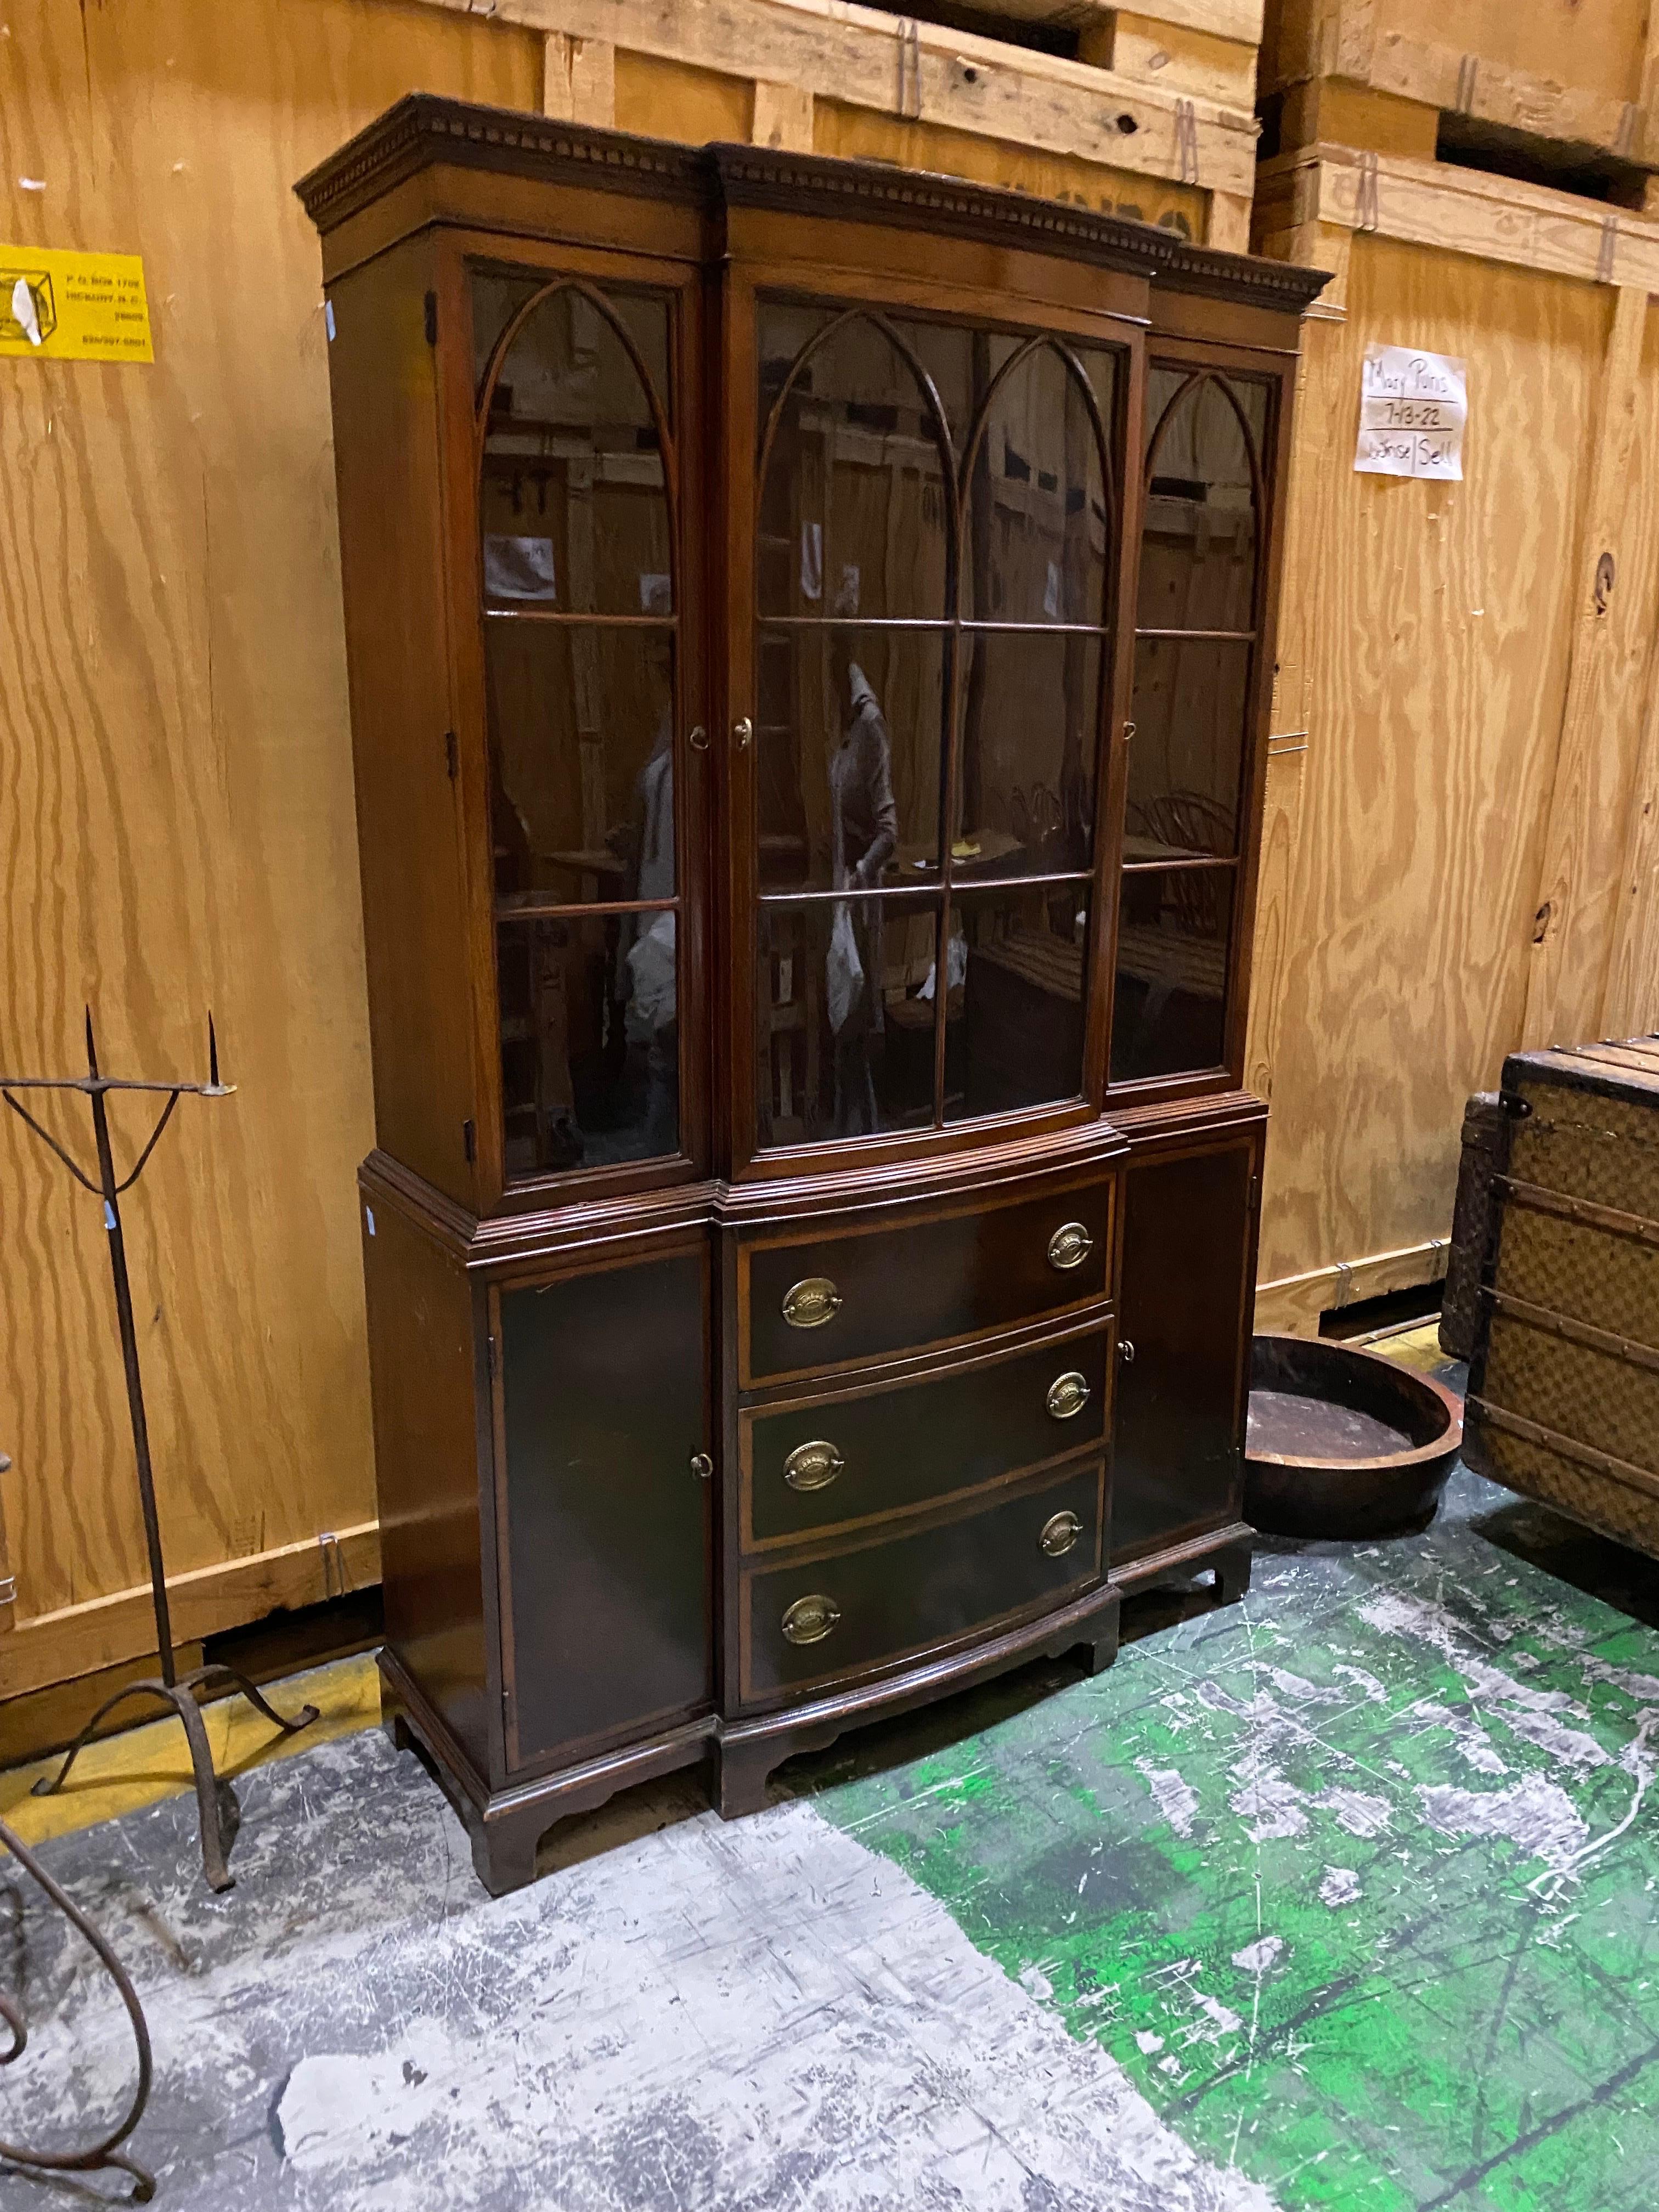 Mahogany Georgian style bowfront bookcase by Fancher Furniture Co.
A lovely 20th Century reproduction with bowfront central glass door on the upper section and flat glass doors on either side and adjustable shelves. Bottom section, three central